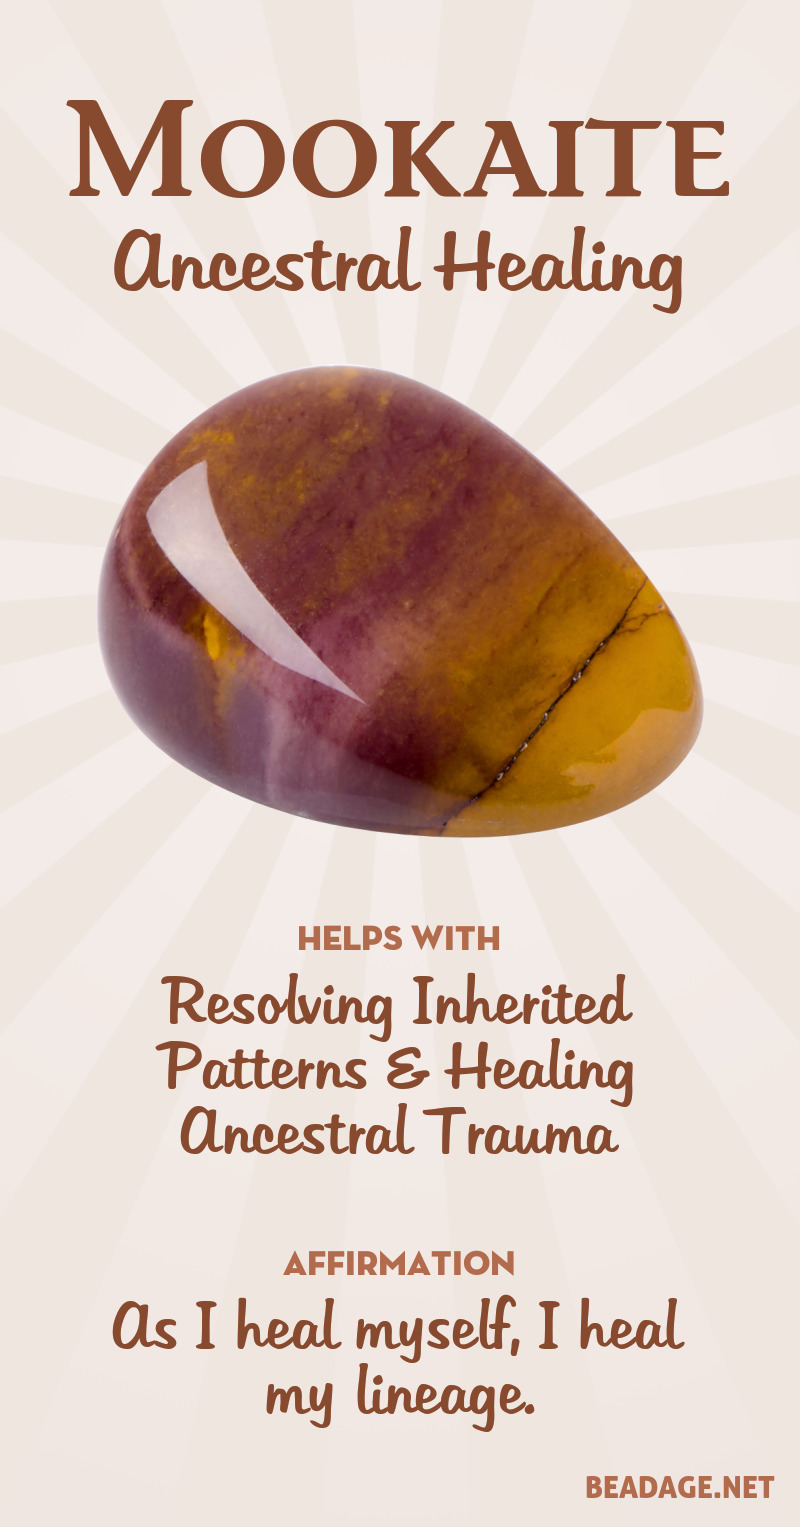 Mookaite is a yellow, brown and reddish-purple form of jasper found only in Australia. It helps you connect to your animal instincts, revitalizes the body, and supports ancestral healing. Learn more about Mookaite Jasper meaning + healing properties, benefits & more. Visit to find gemstone meanings & info about crystal healing, stone powers, and chakra stones. Get some positive energy & vibes! #gemstones #crystals #crystalhealing #beadage